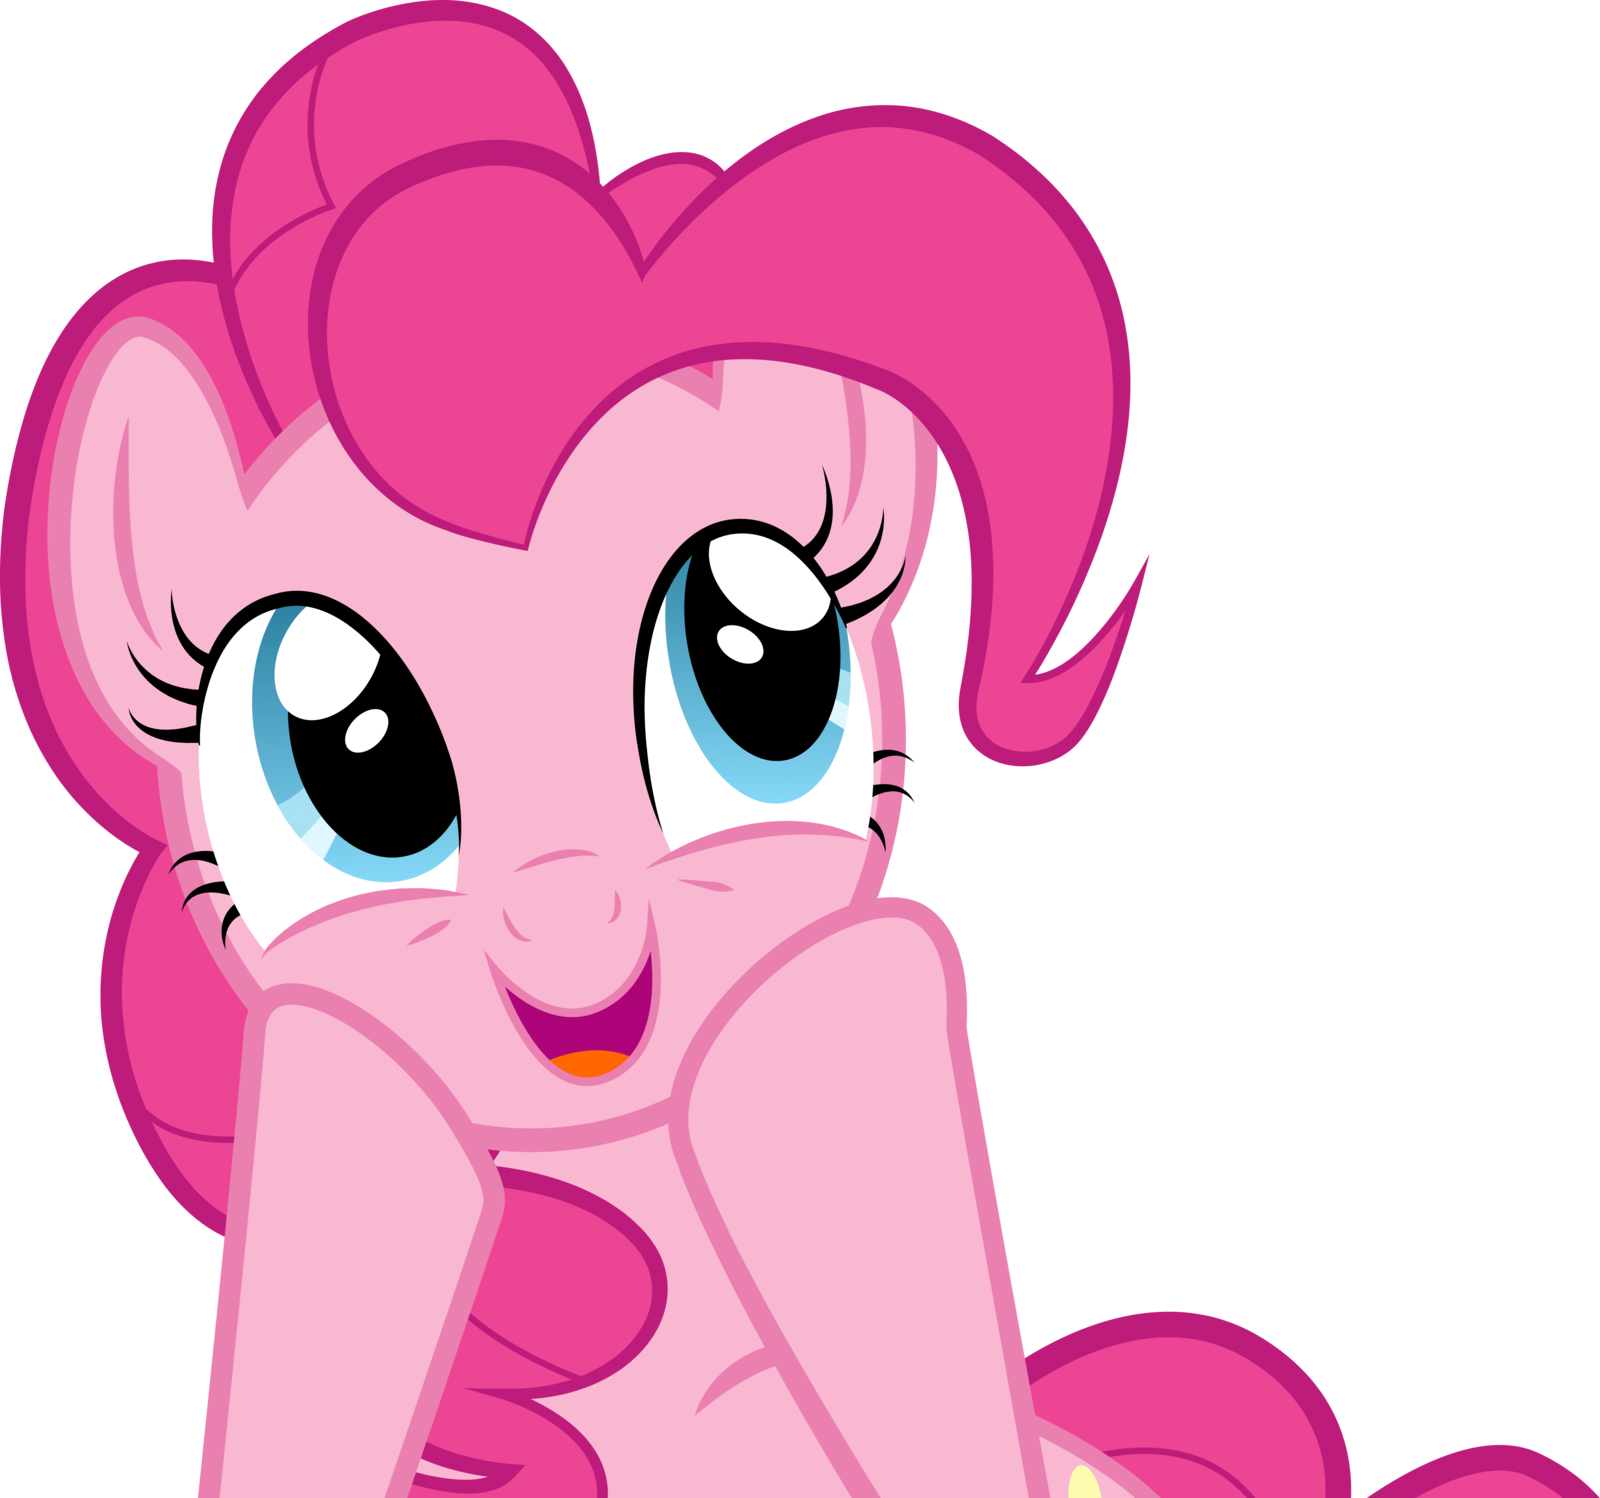 Equestria Daily - MLP Stuff!: Pinkie Pie Day on October 7th!